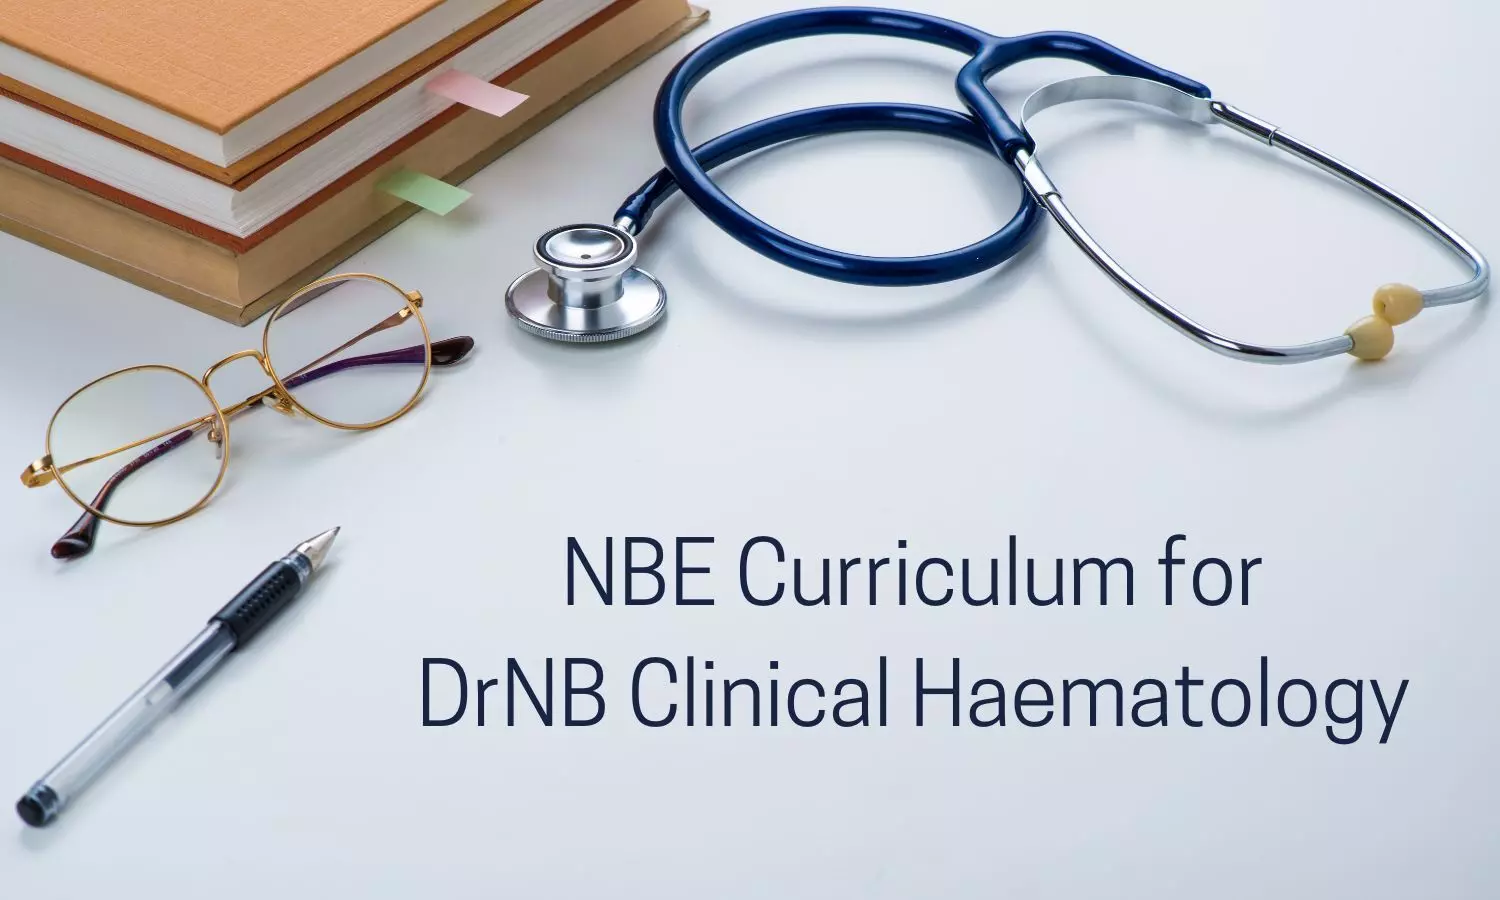 DrNB Clinical Haematology  In India: Check Out NBE Released Curriculum